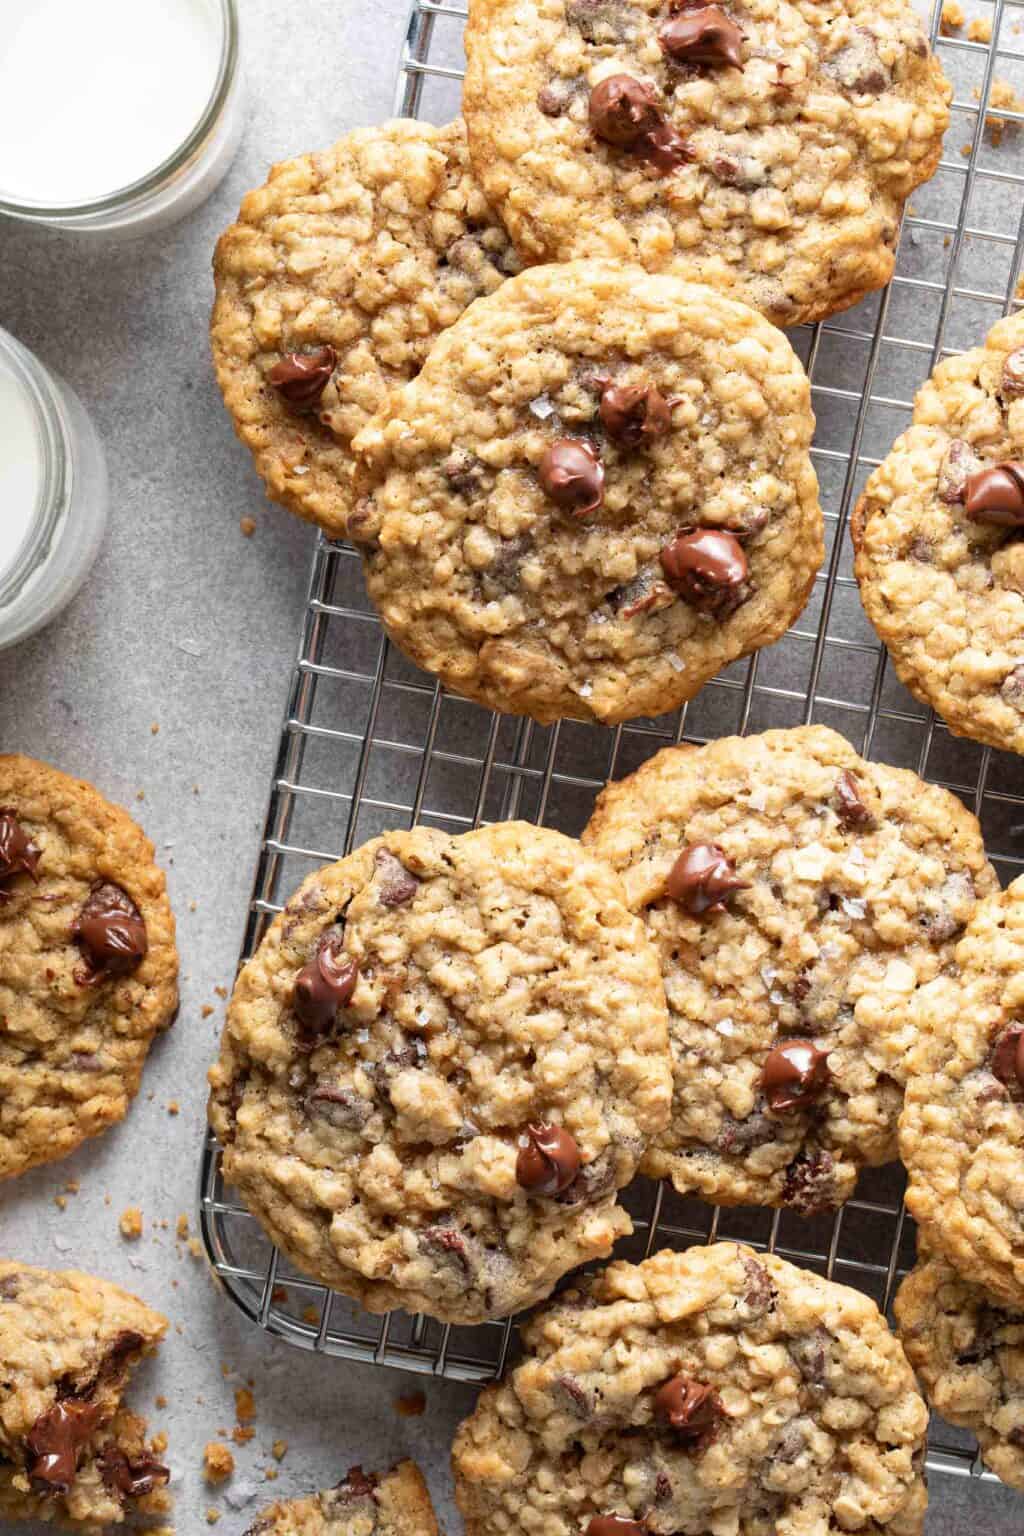 Best Oatmeal Chocolate Chip Cookies - The Harvest Kitchen